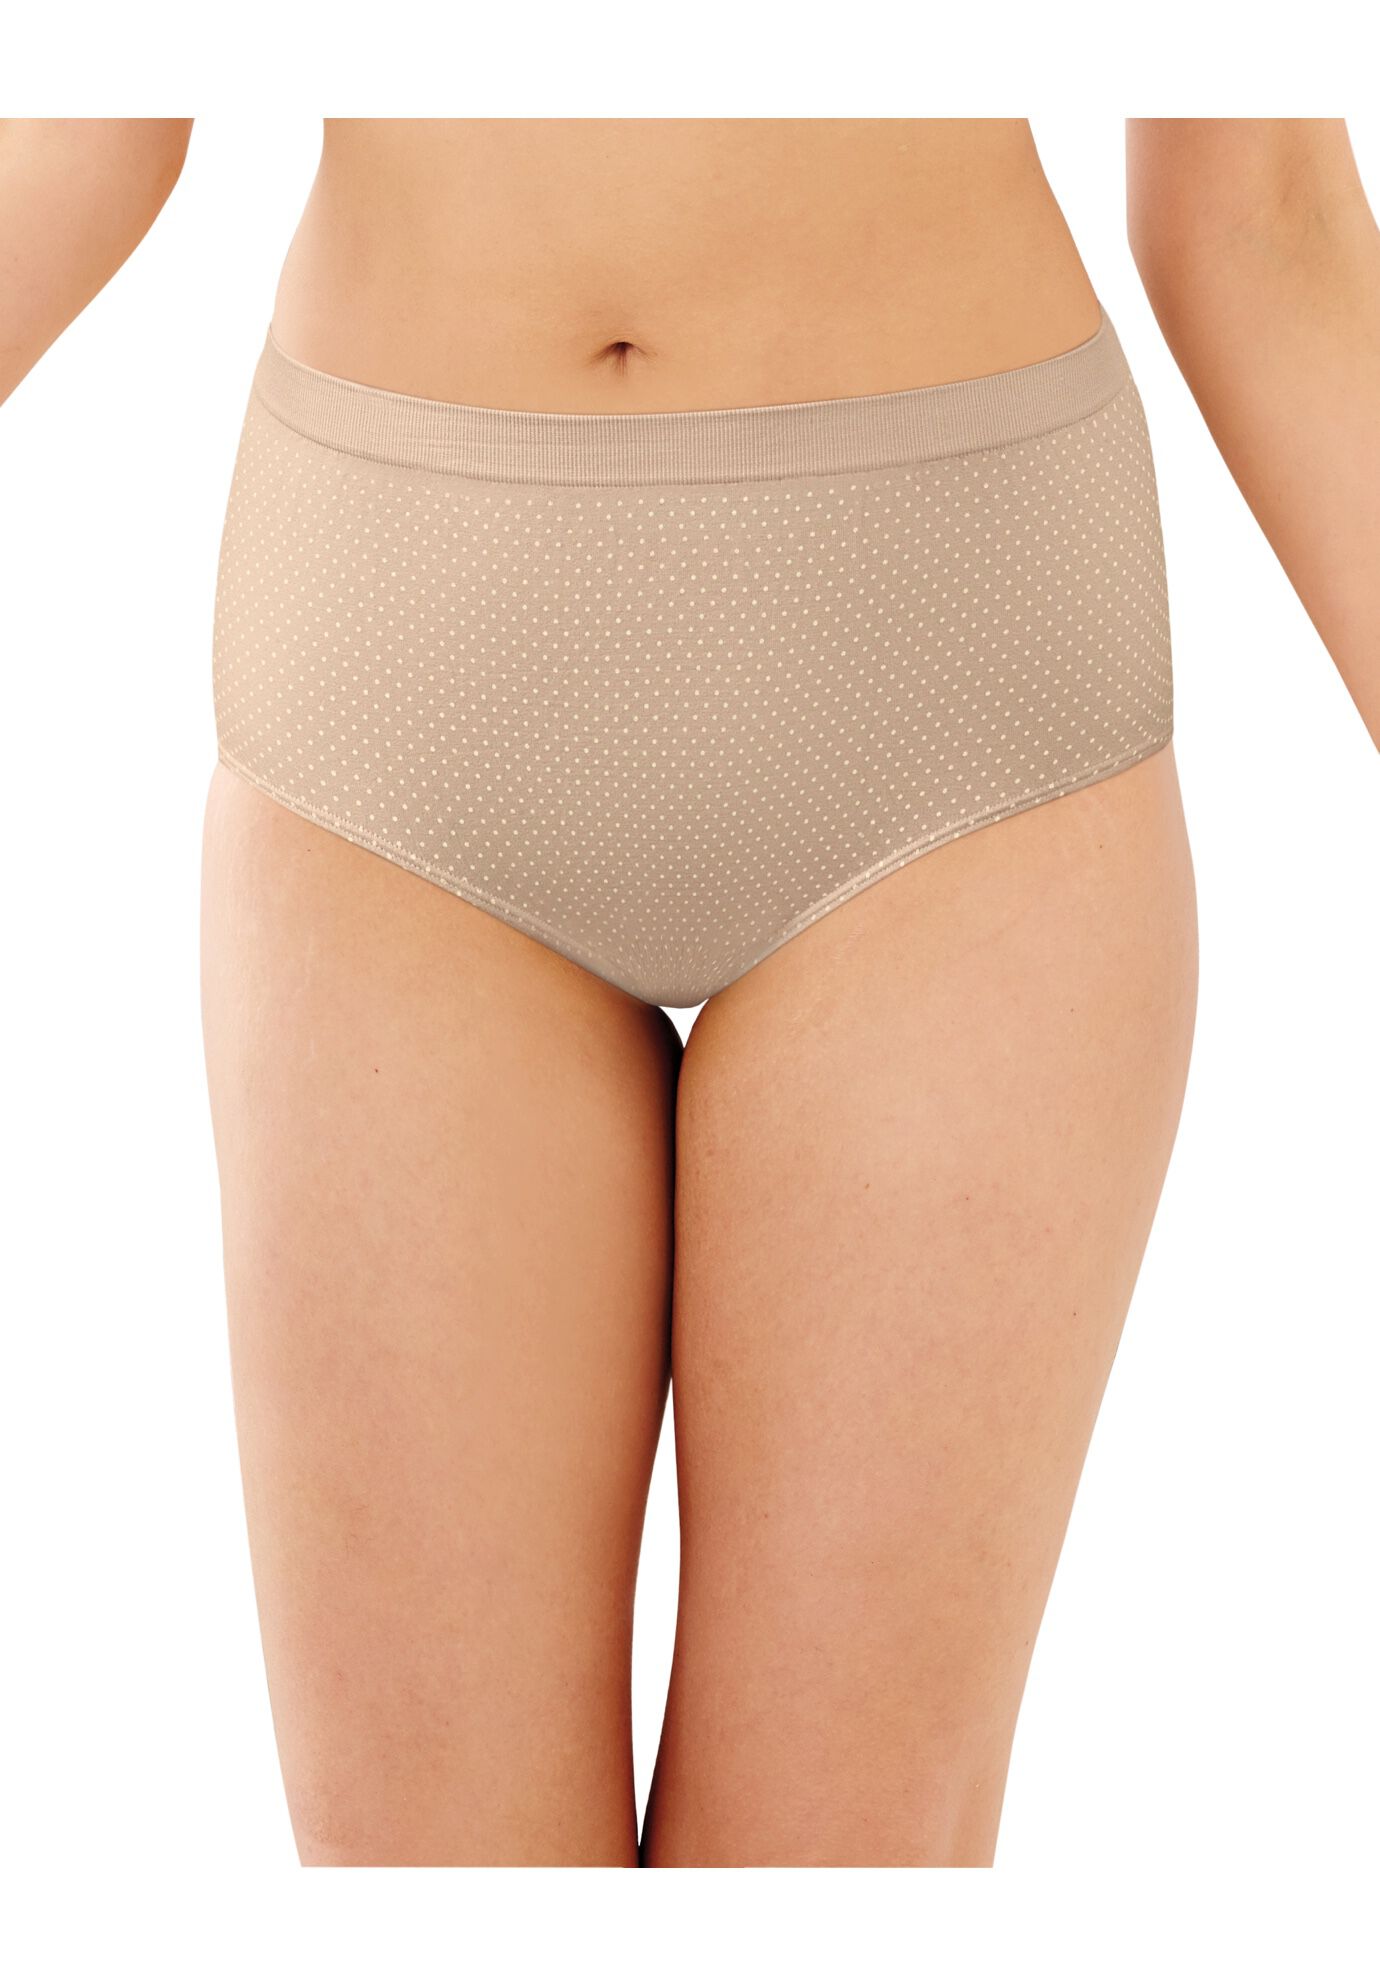 Plus Size Women's Comfort Revolution Brief by Bali in Nude Dot Print (Size 11)